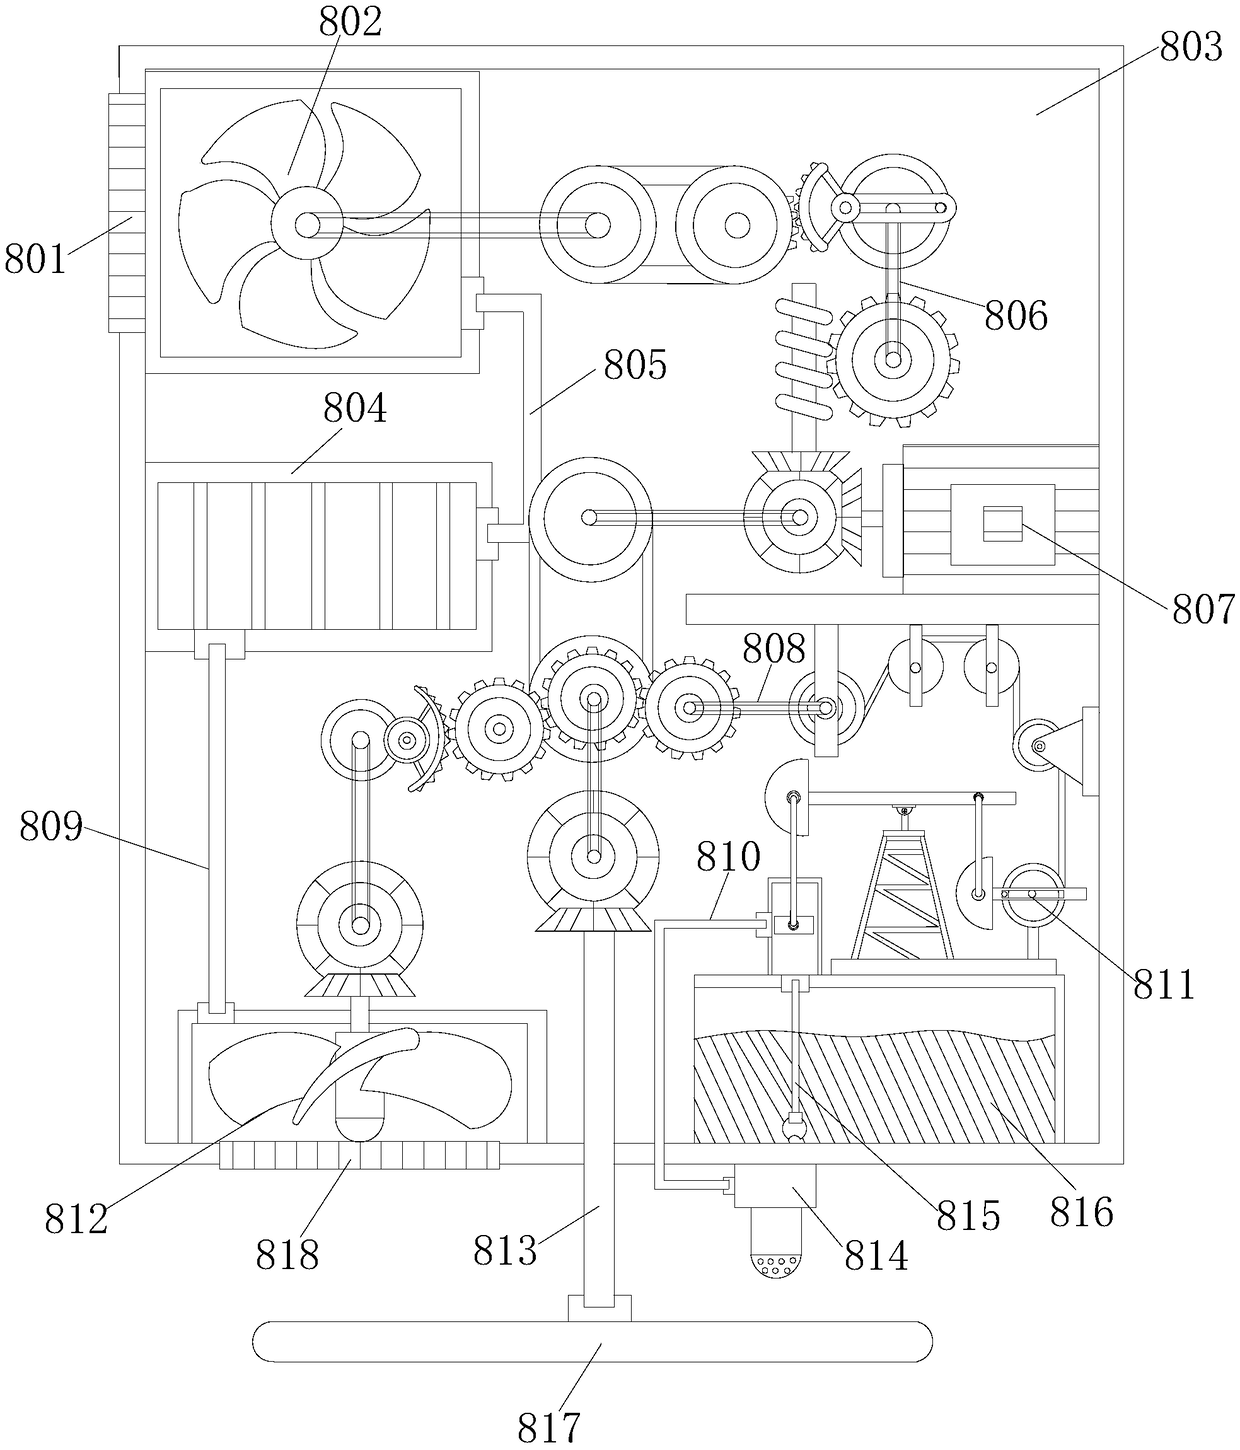 Machining equipment for parts of automobile air conditioner refrigeration system